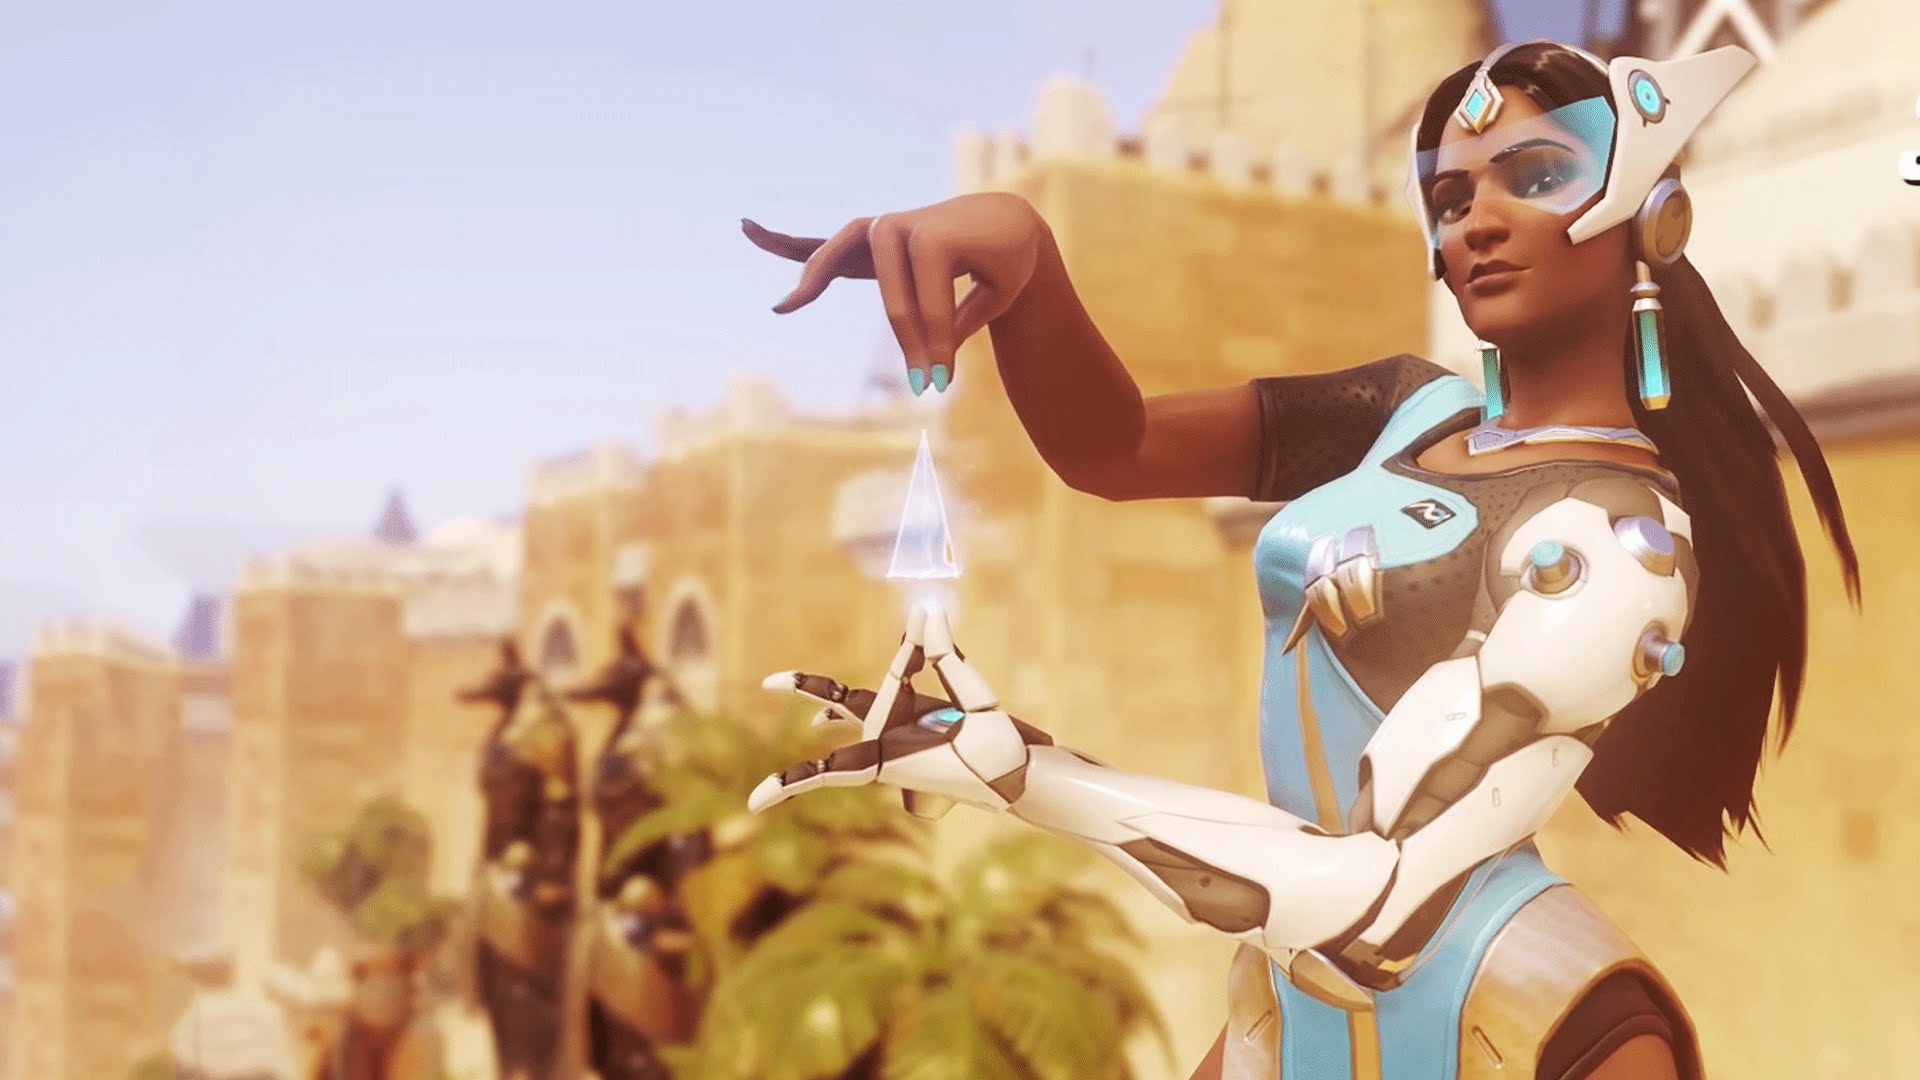 Overwatch’s Symmetra Mains Agree: The Problem Is Other Players